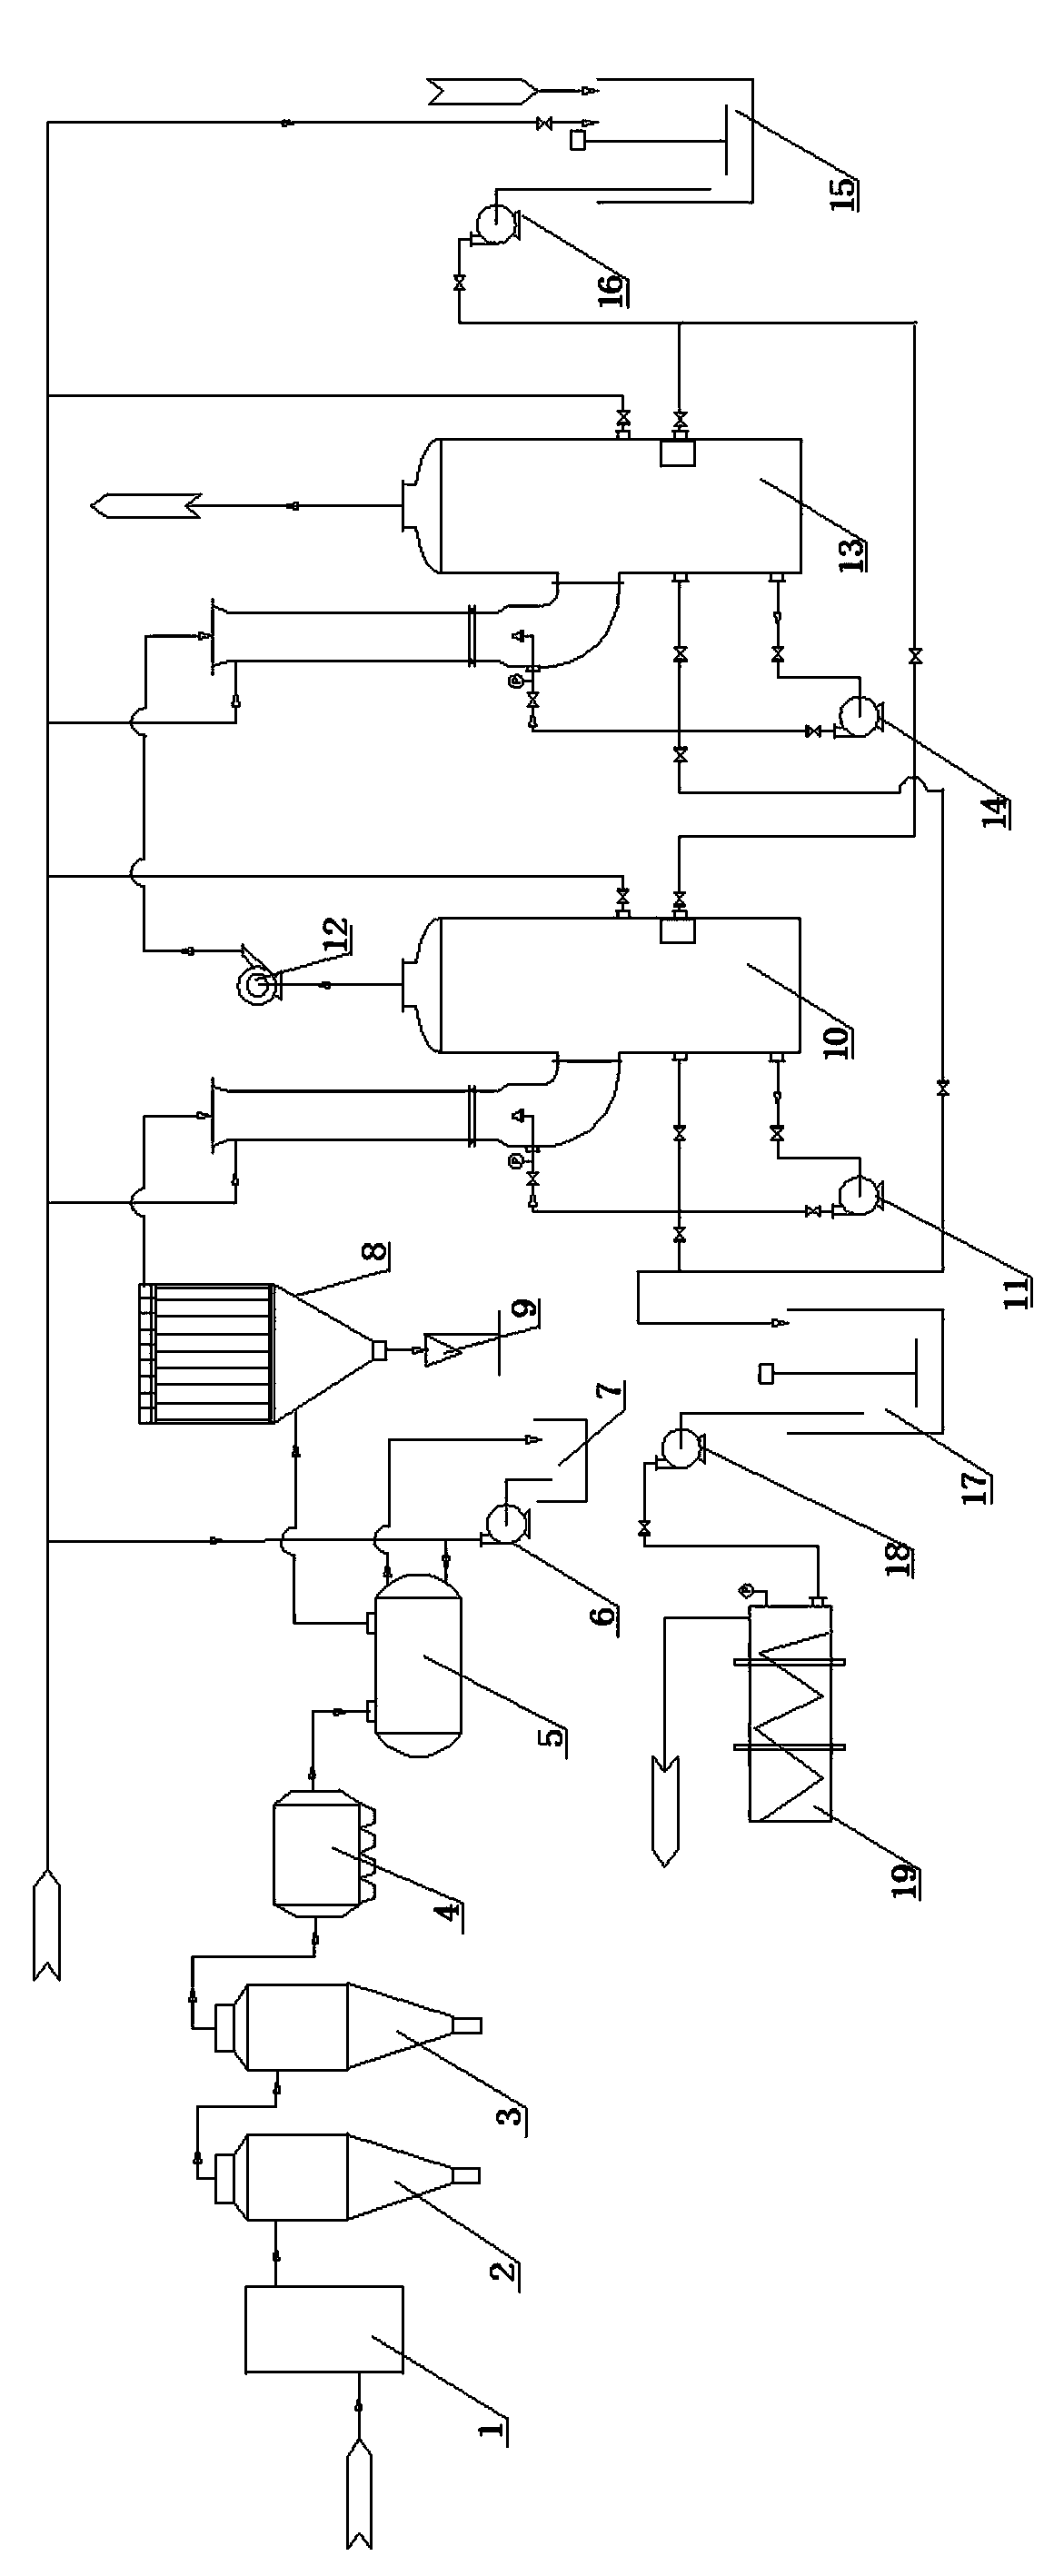 High arsenicum gold ore roasting smoke gas treatment system and method for recovering arsenicum and desulfurating